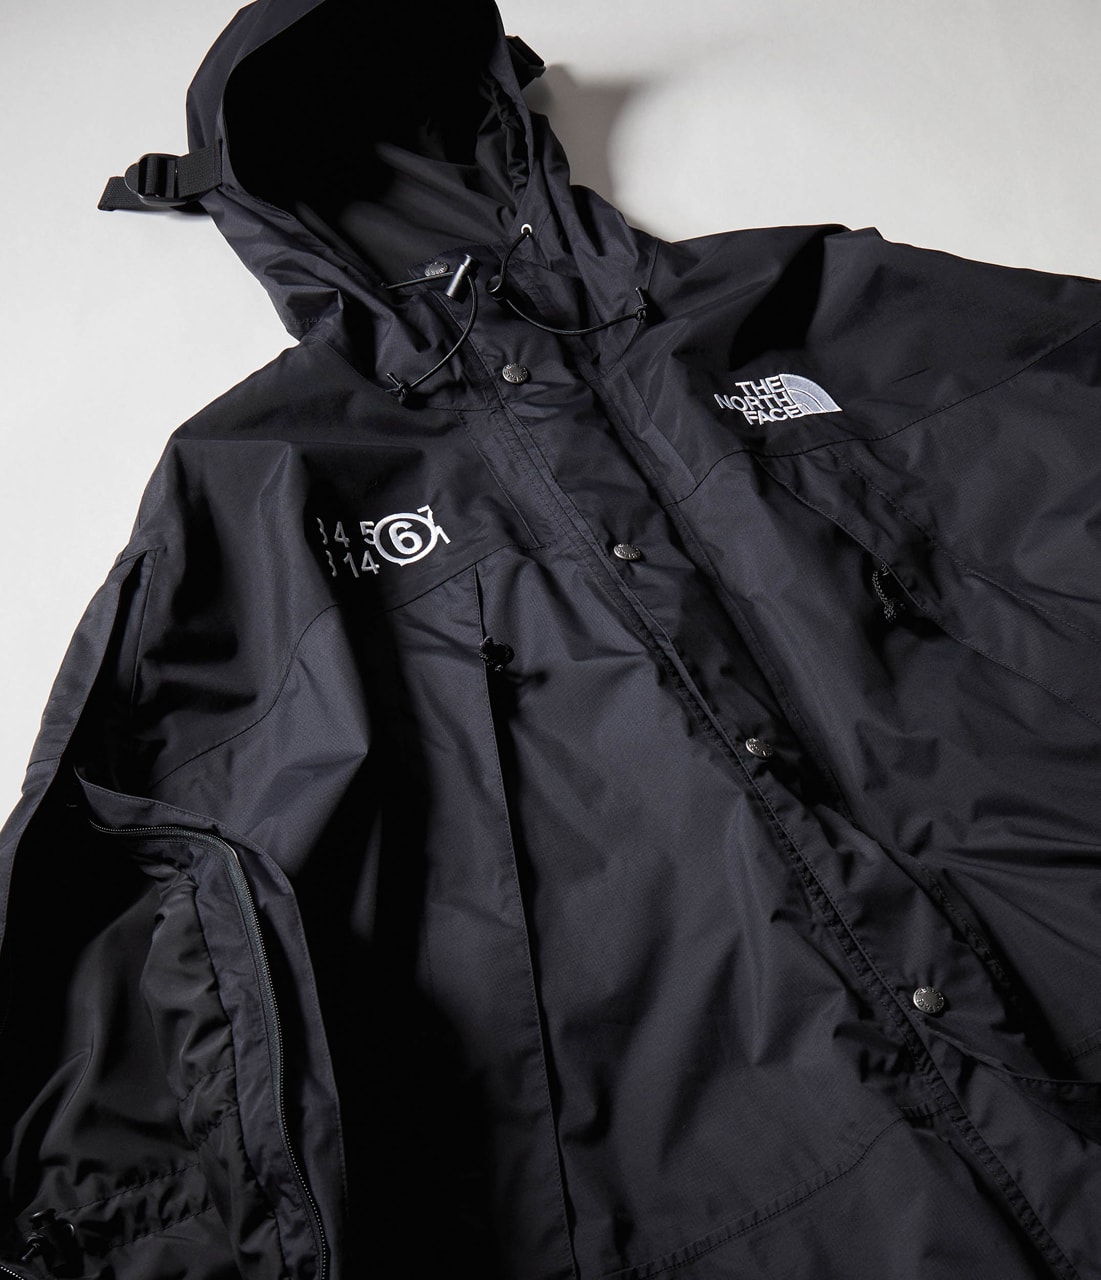 MM6 Maison Margiela x The North Face FW20 Collab Launch | Hypebeast